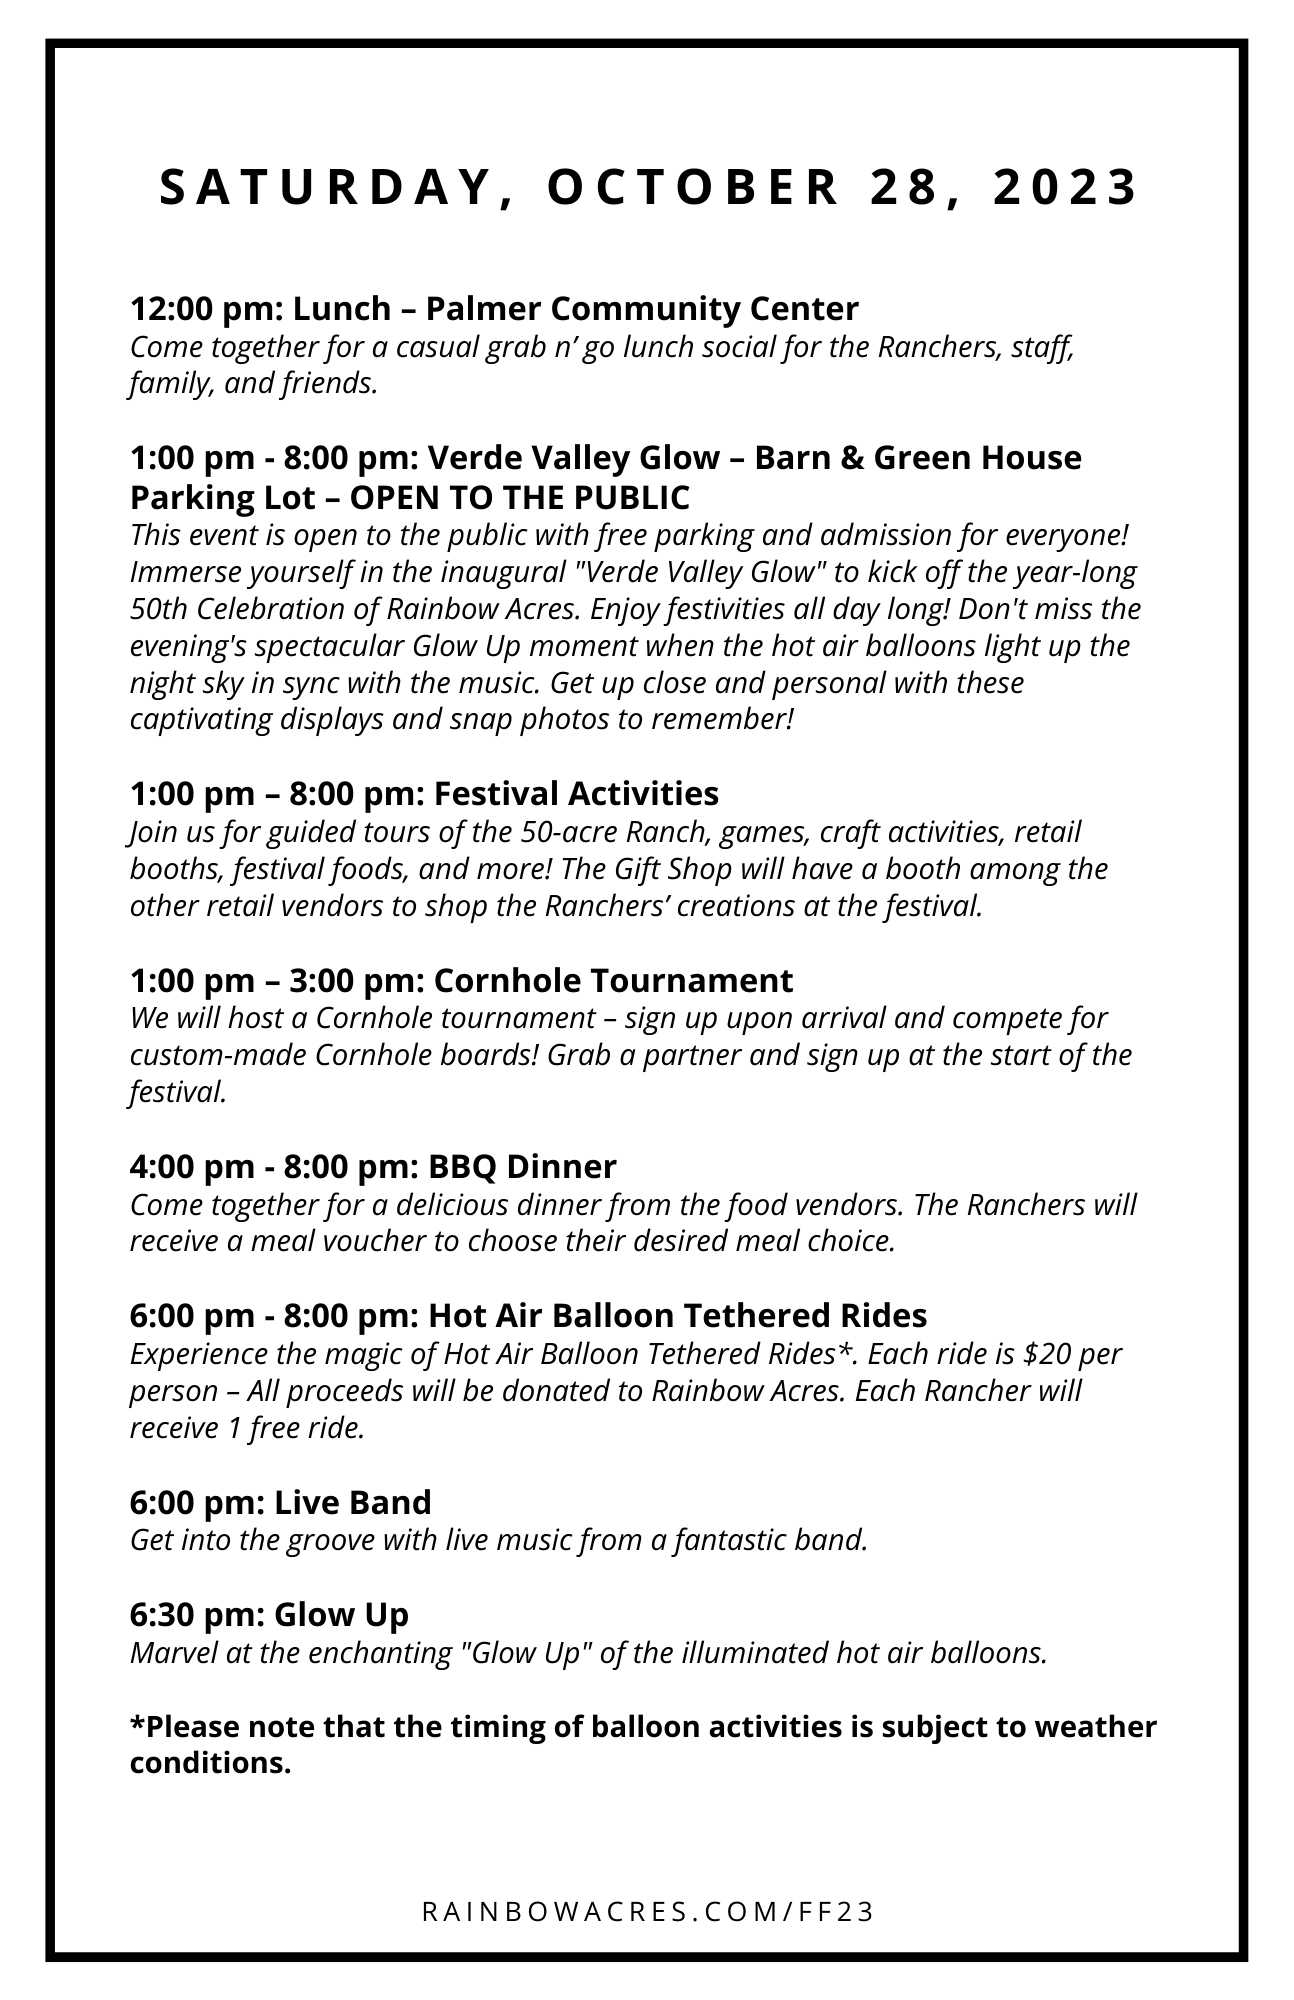 Agenda for family and friends weekend Saturday October 28, 2023